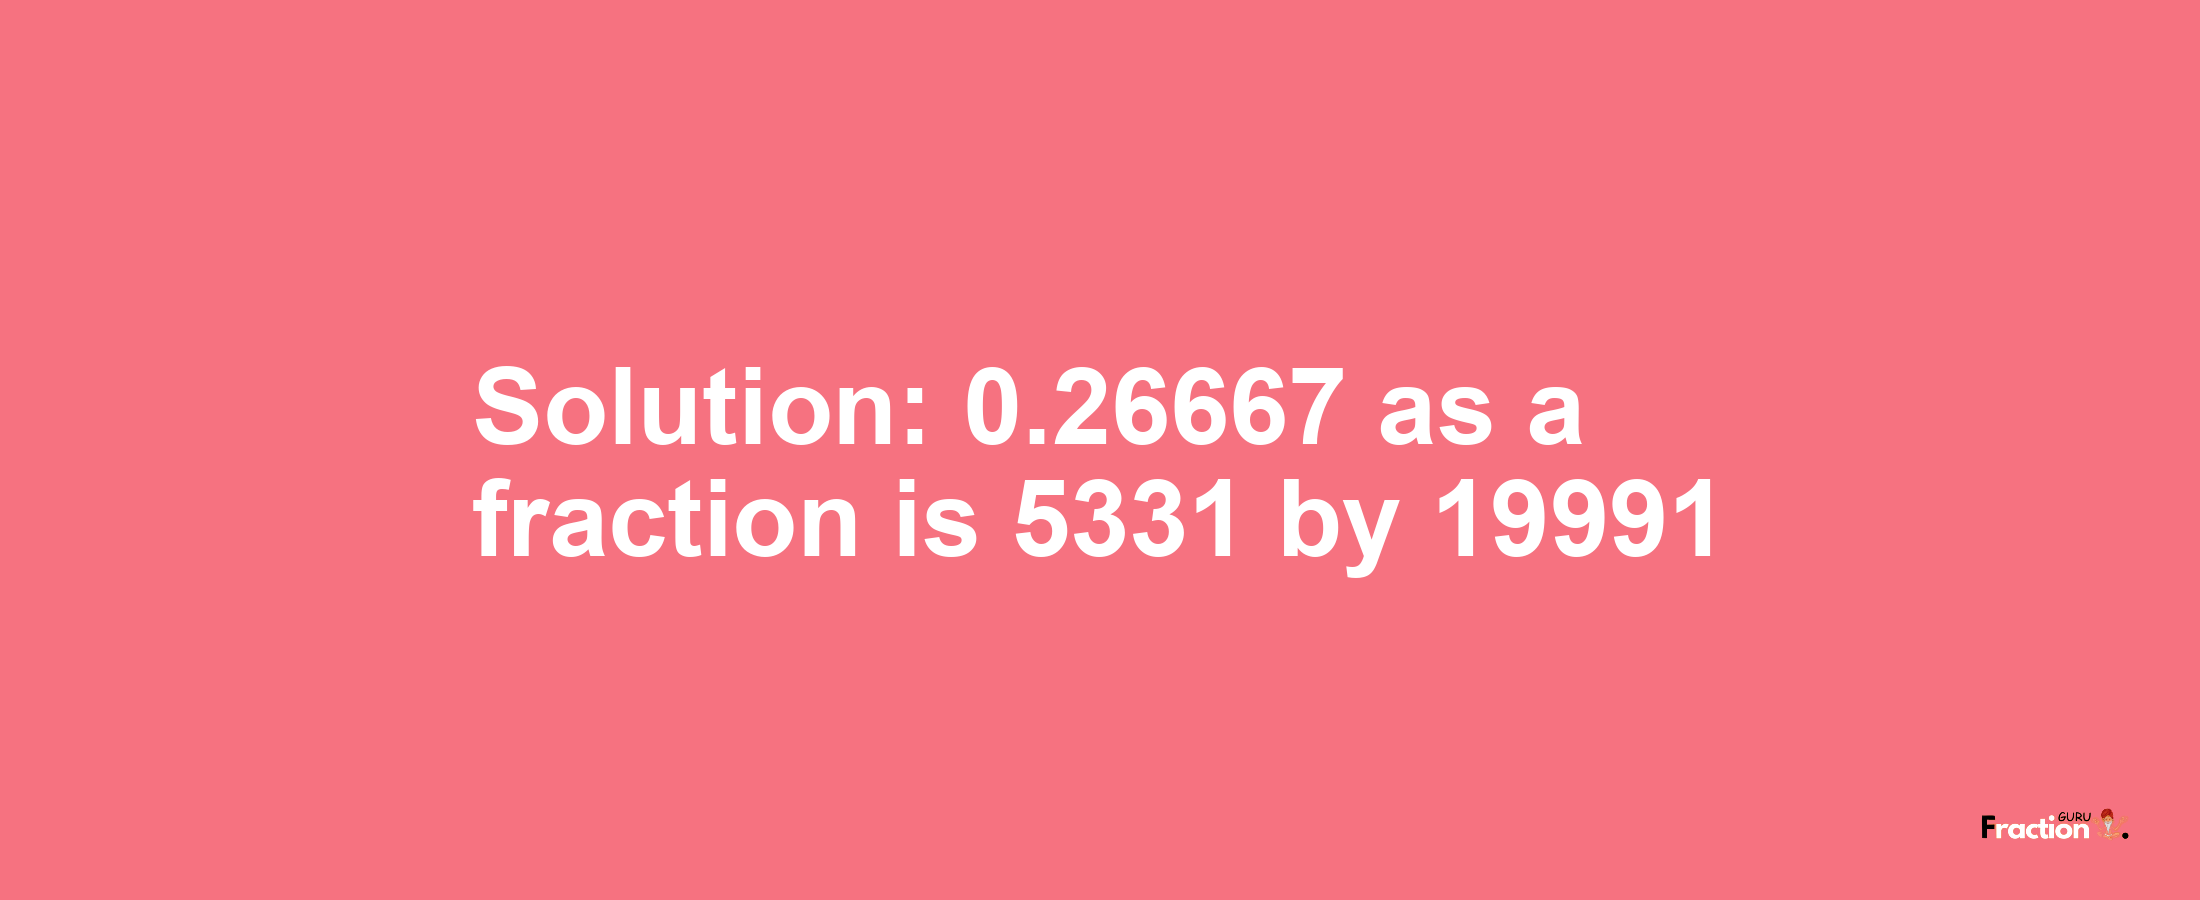 Solution:0.26667 as a fraction is 5331/19991